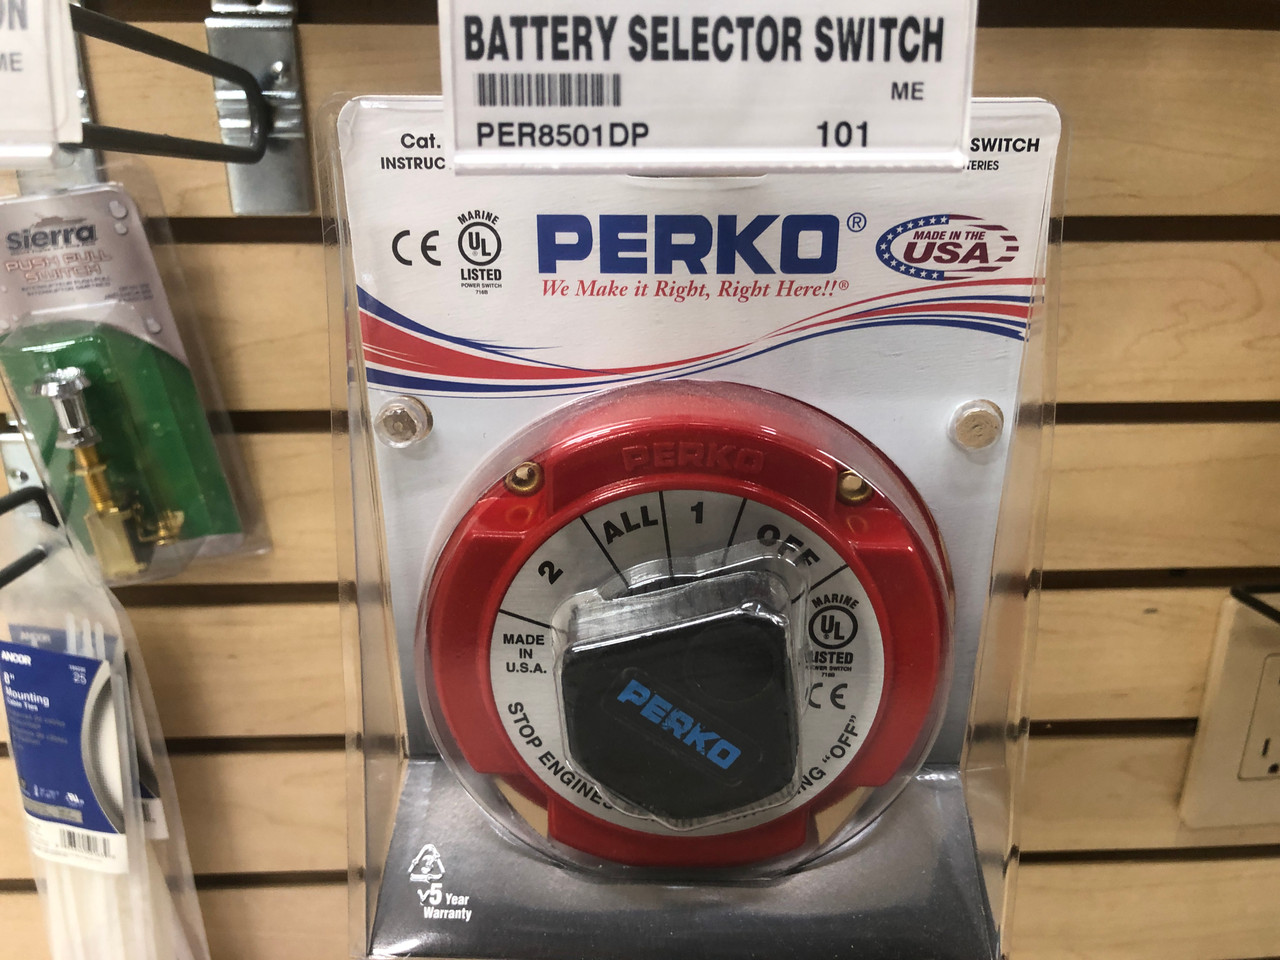 BATTERY SELECTOR SWITCH